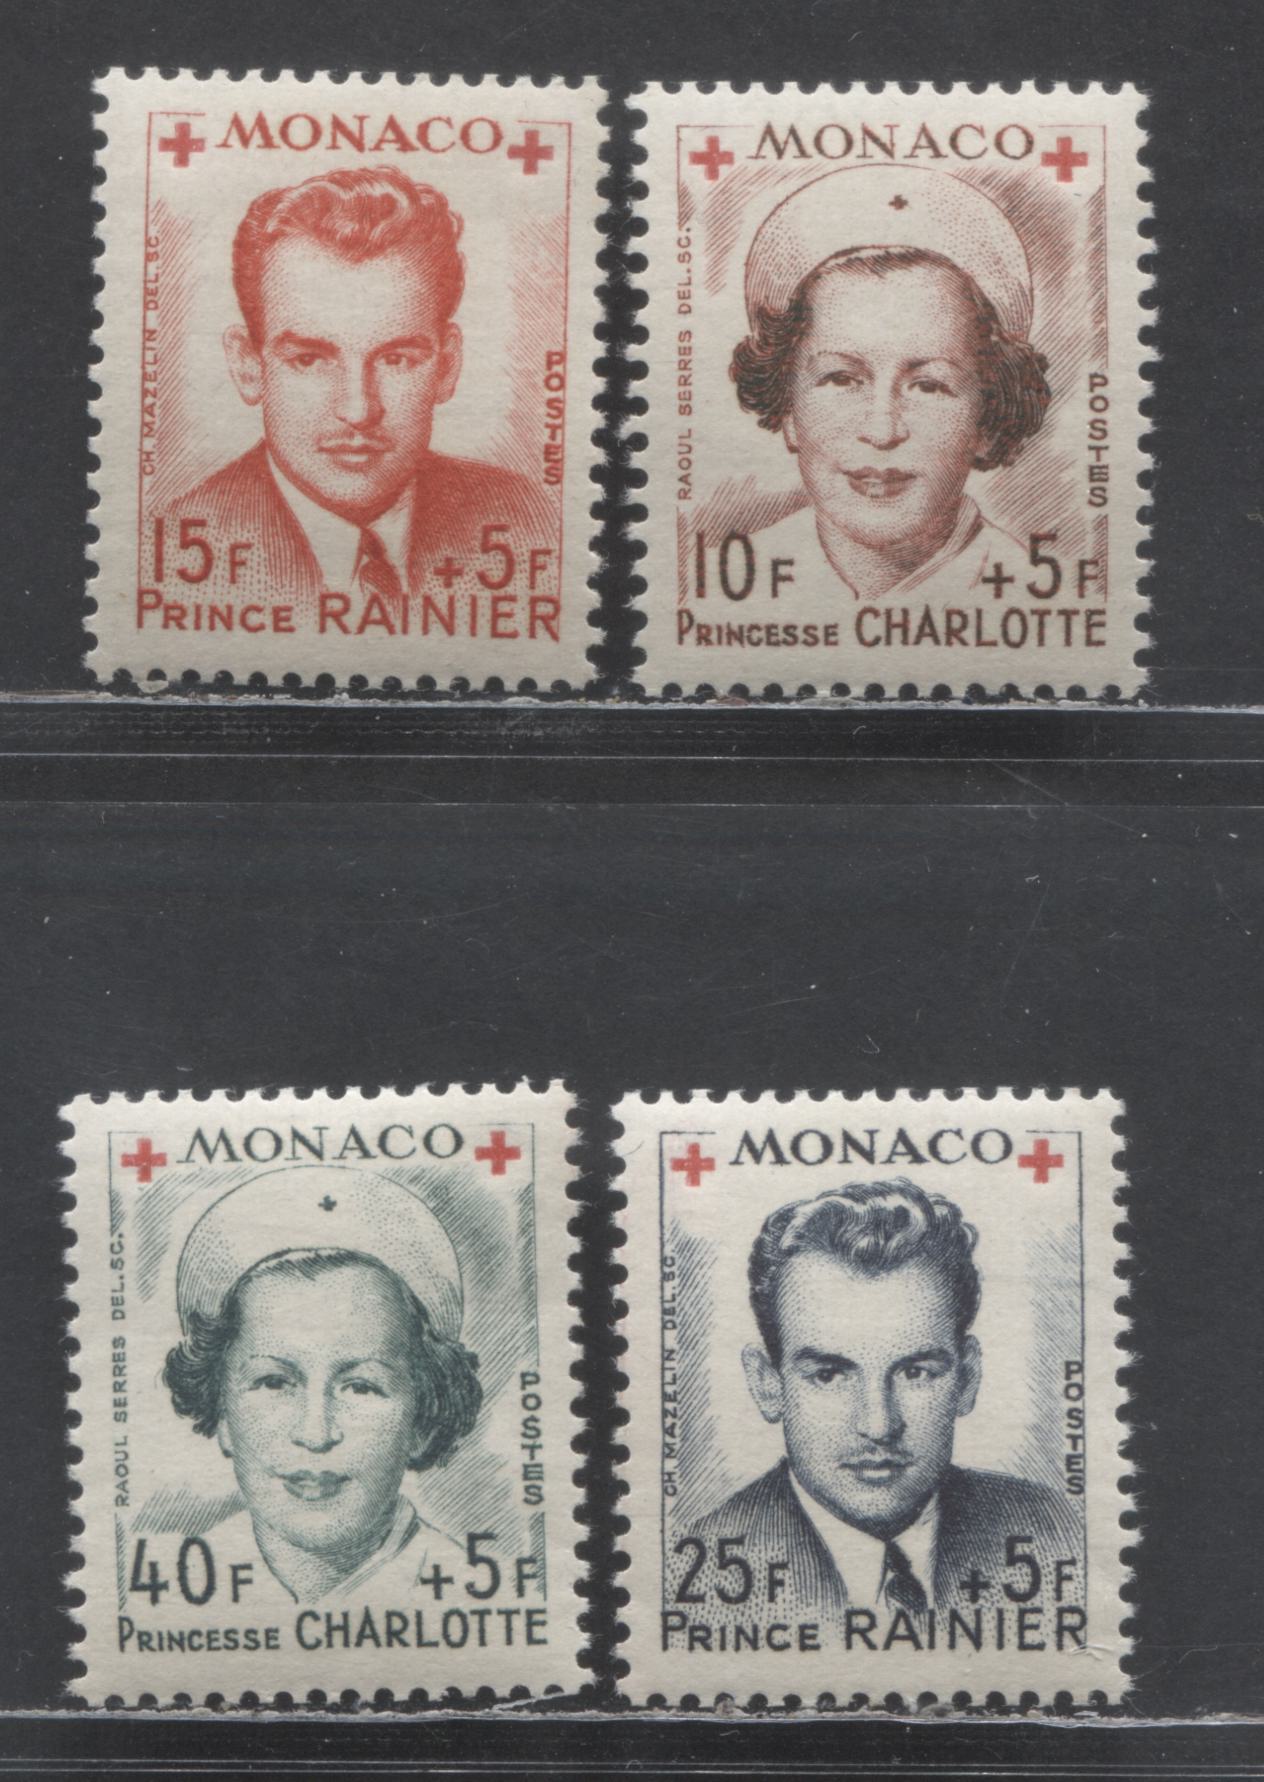 Lot 67 Monaco SC#B96-B99 1949 Princess Charlotte & Ranier III Issue, 4 VFNH Singles, Click on Listing to See ALL Pictures, 2017 Scott Cat. $40